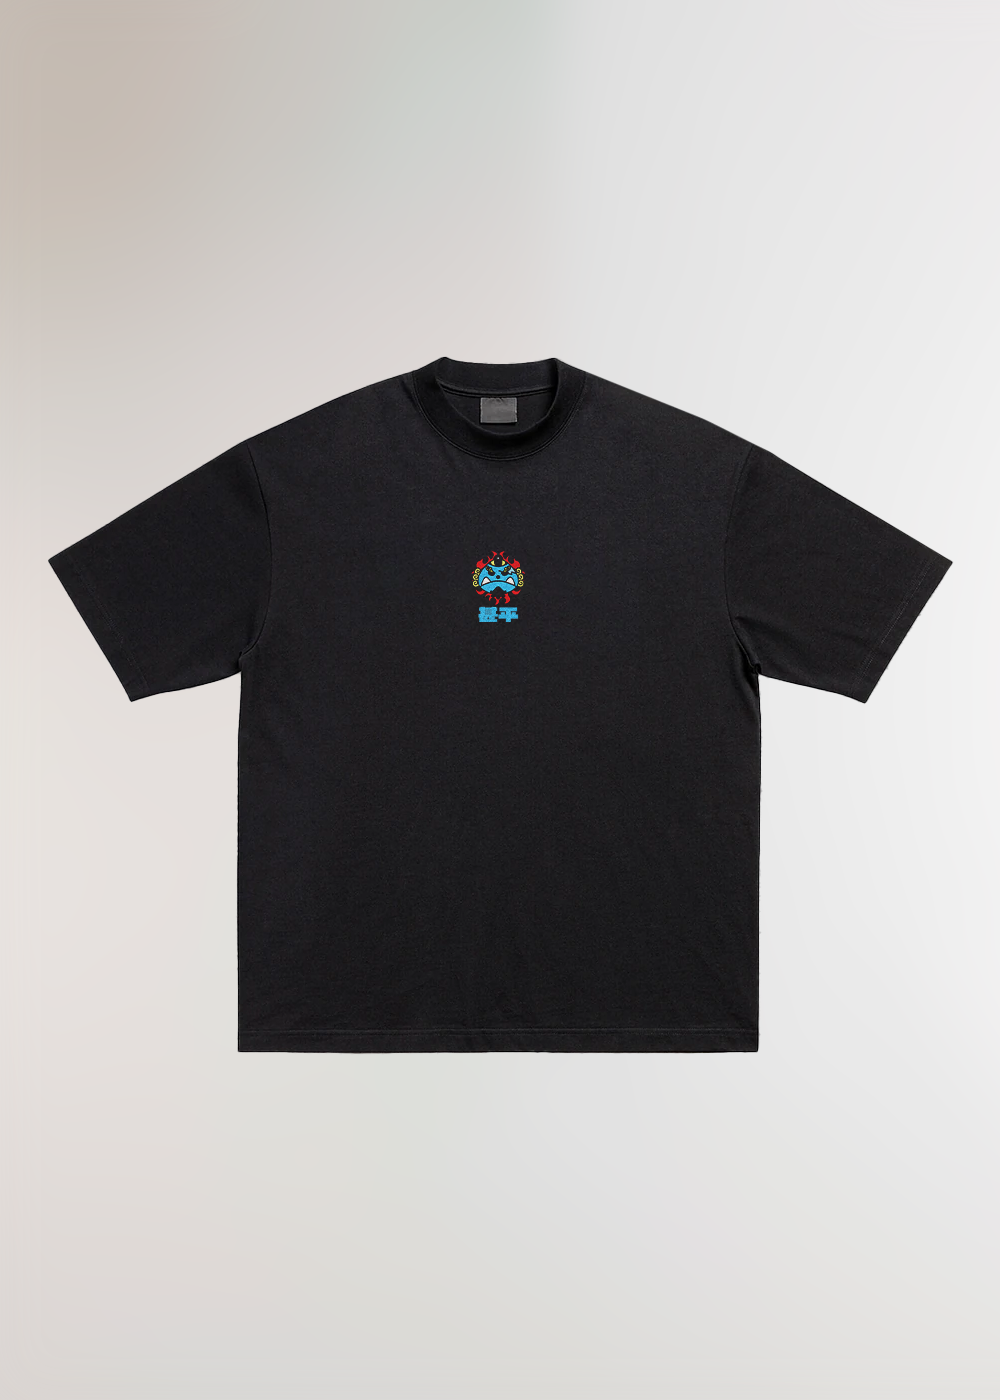 MADE IN JAPAN - KNIGHT OF THE SEA® BLACK T-SHIRT